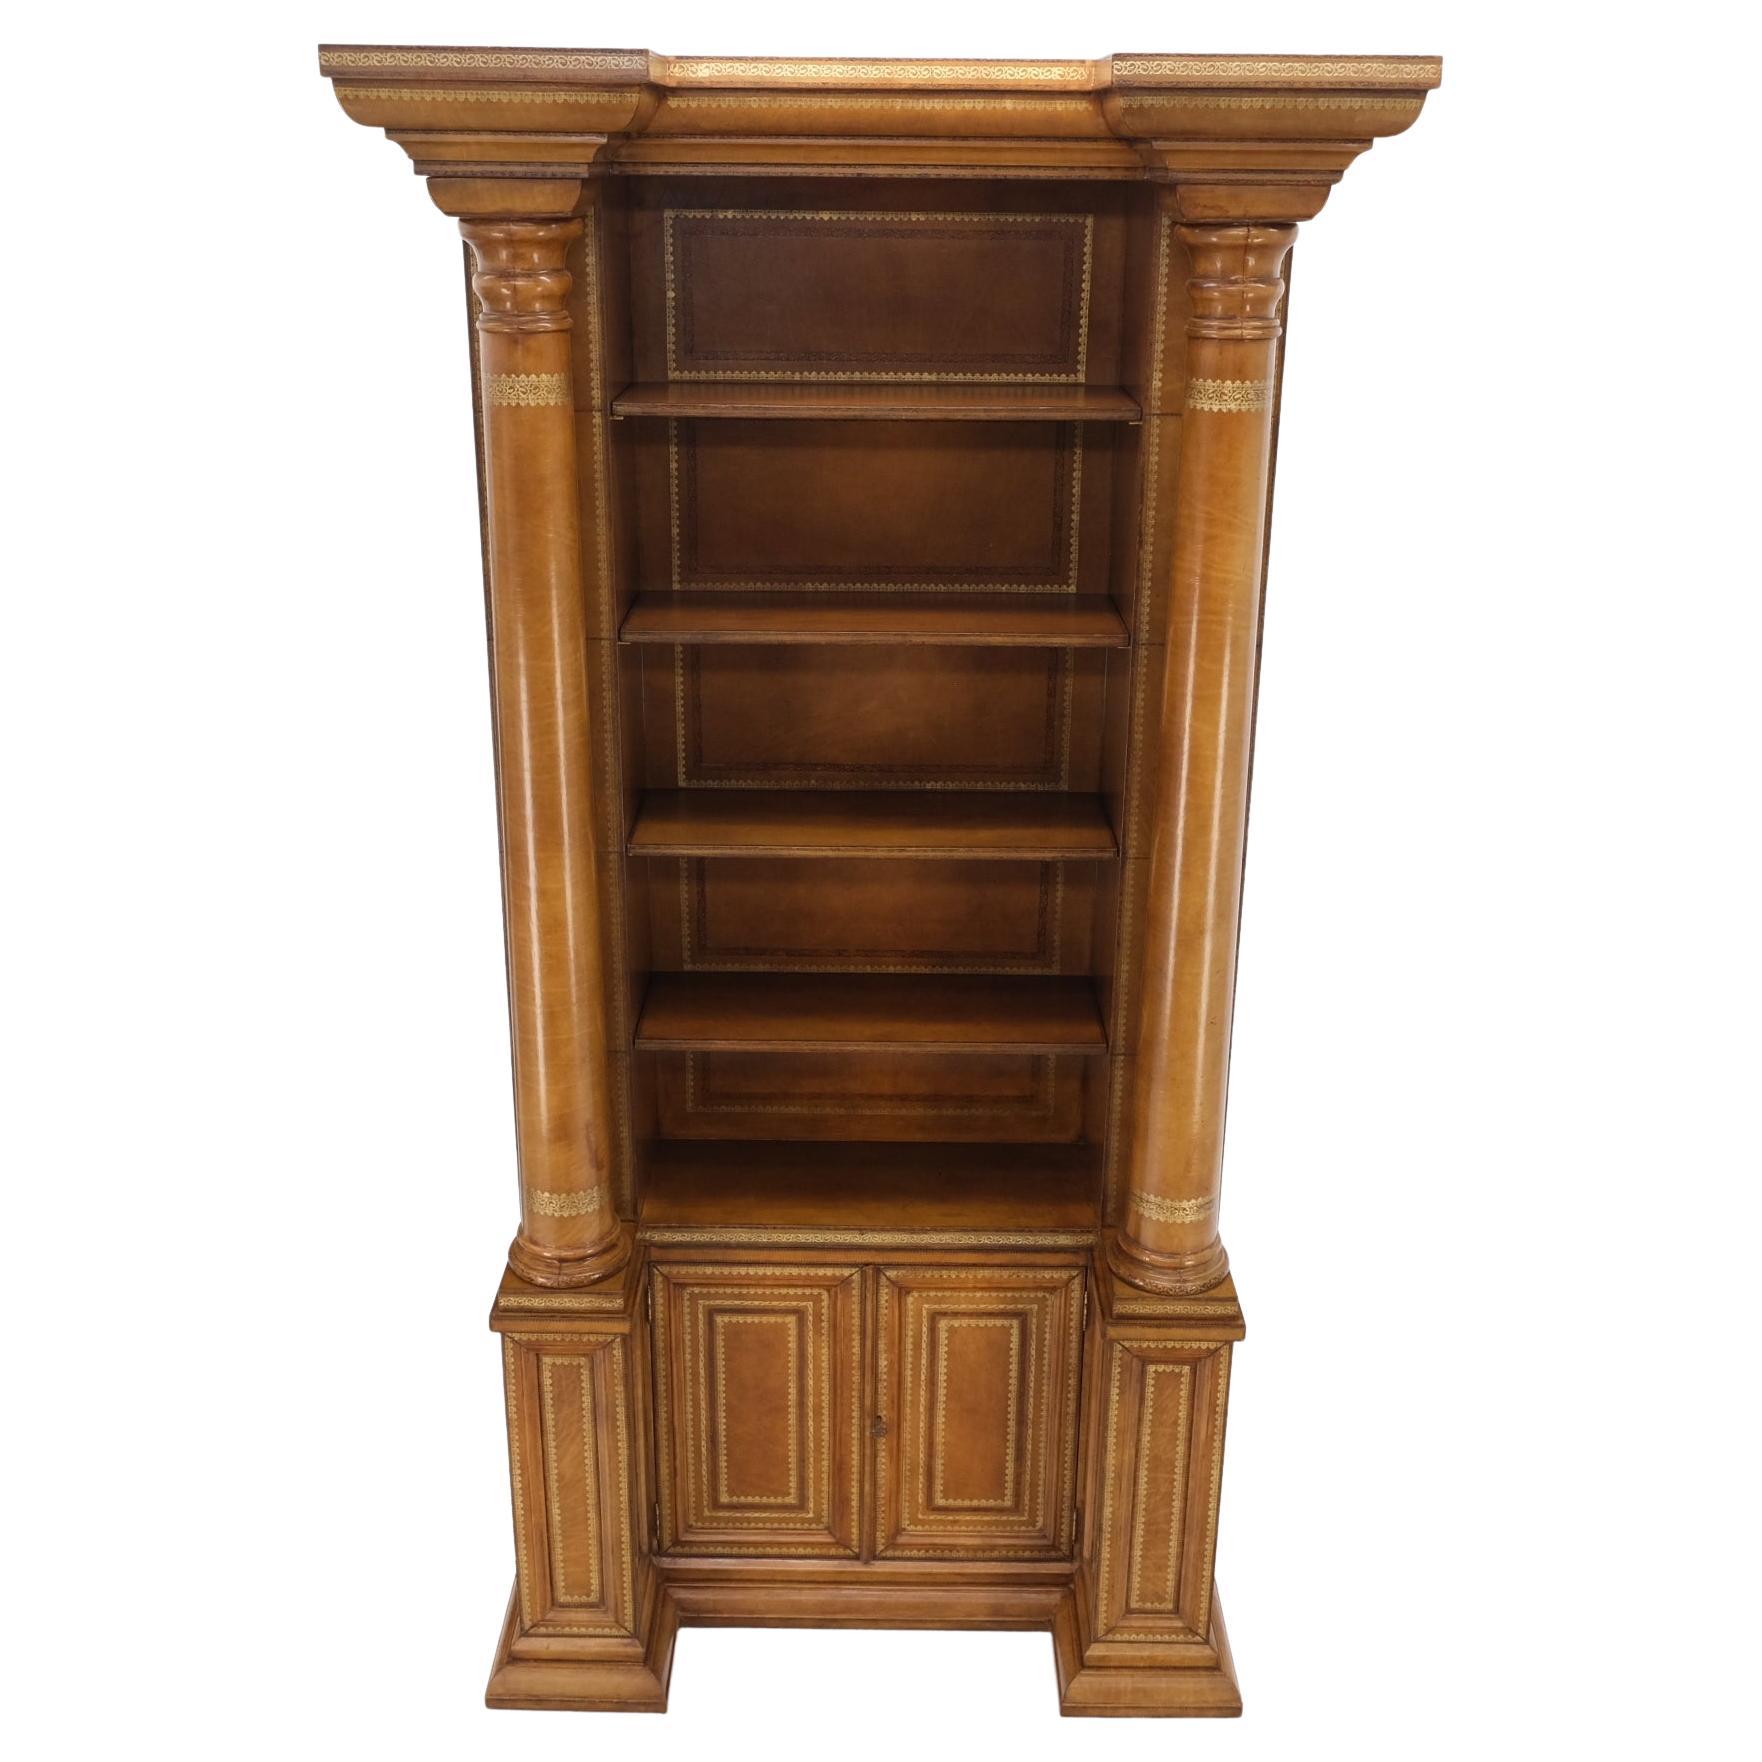 20th Century All Wrapped in Tooled Leather Massive Decorative Columns 2 Part Bookcase Hutch For Sale